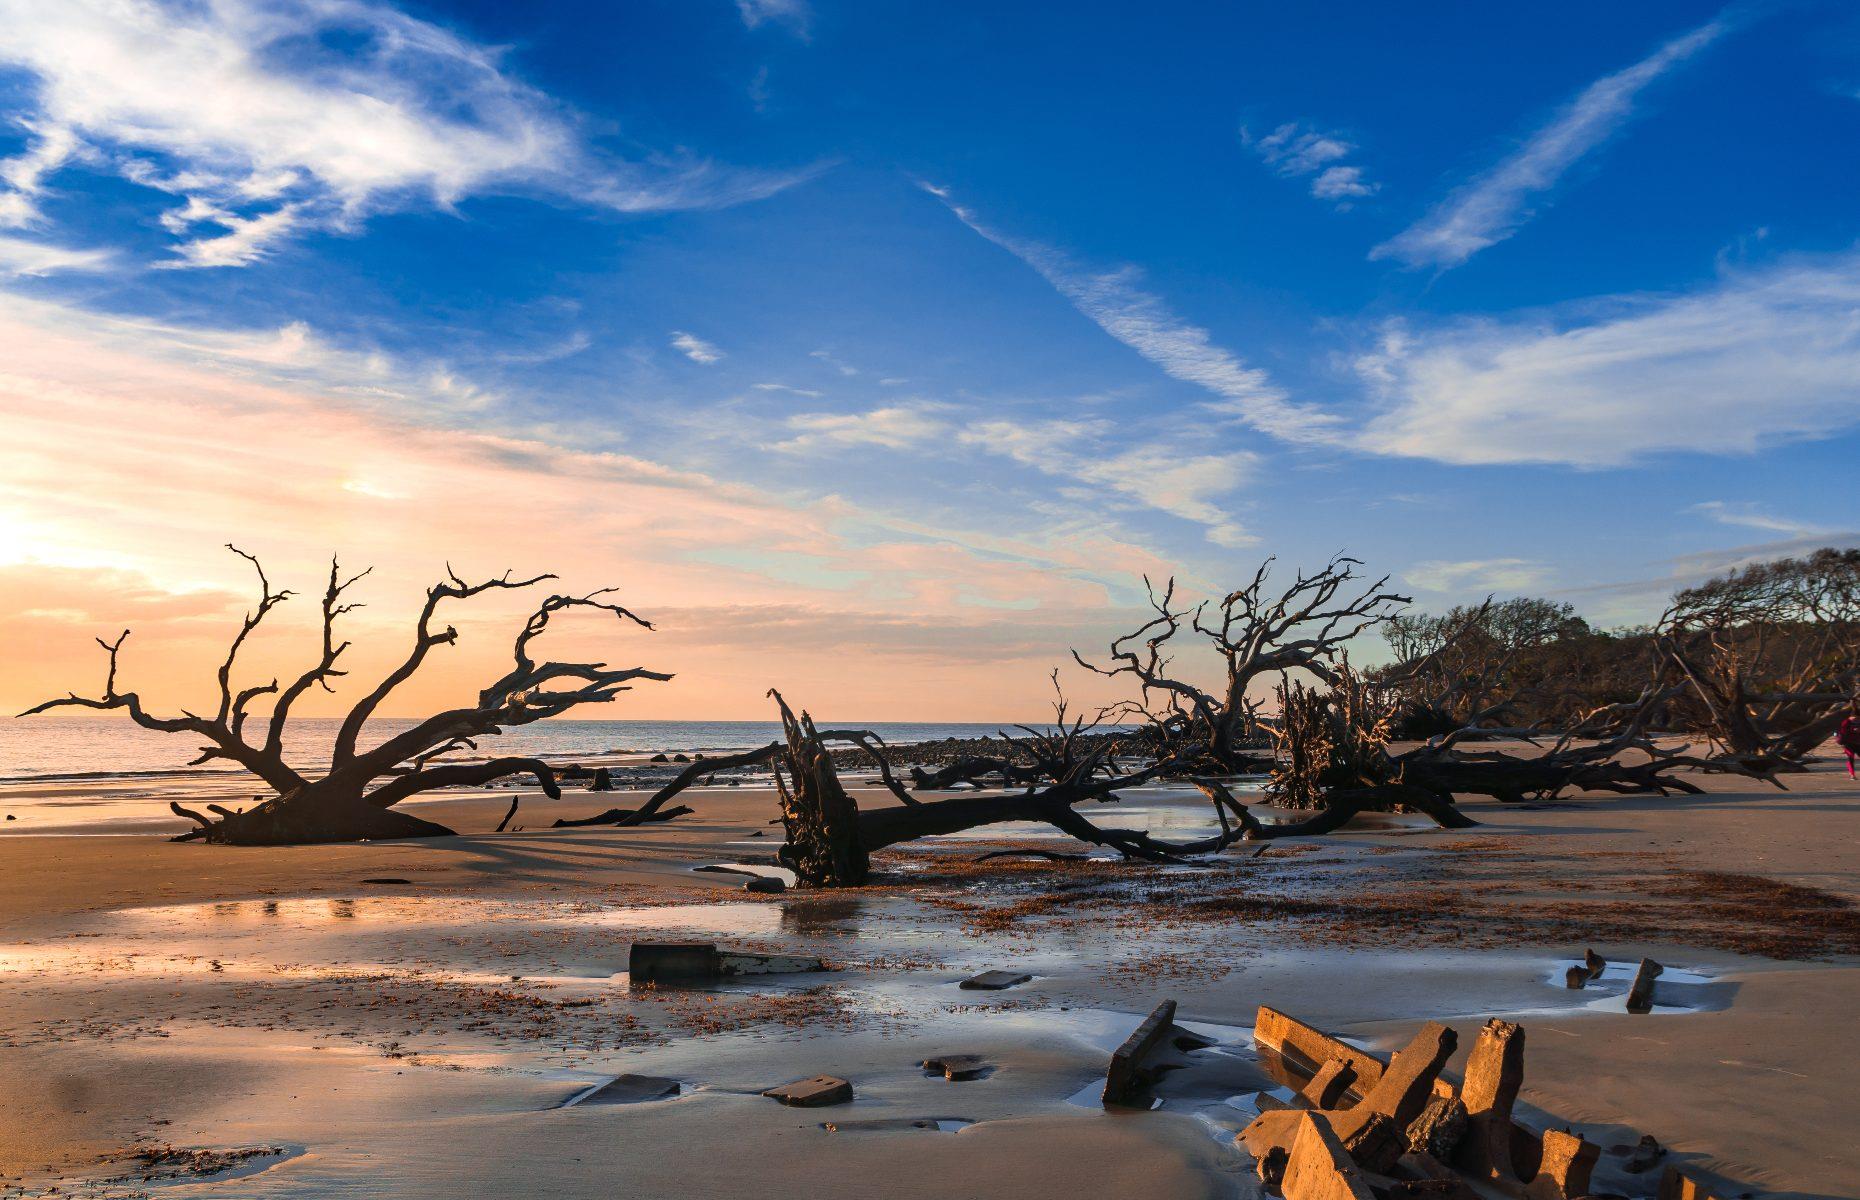 <p>The most southerly of Georgia’s Golden Isles, Jekyll Island is hauntingly picturesque. The tranquil spot is best known for its scenic stretches of sand, with Driftwood Beach a firm favorite. Named after the ancient driftwood strewn across the shoreline, the eerily beautiful weathered trees make the area look like a scene from another world and is often hailed as one of the most romantic beaches in America.</p>  <p><a href="https://www.loveexploring.com/gallerylist/120142/americas-most-beautiful-beaches-photographed-from-above"><strong>Check out America’s most beautiful beaches photographed from above</strong></a></p>